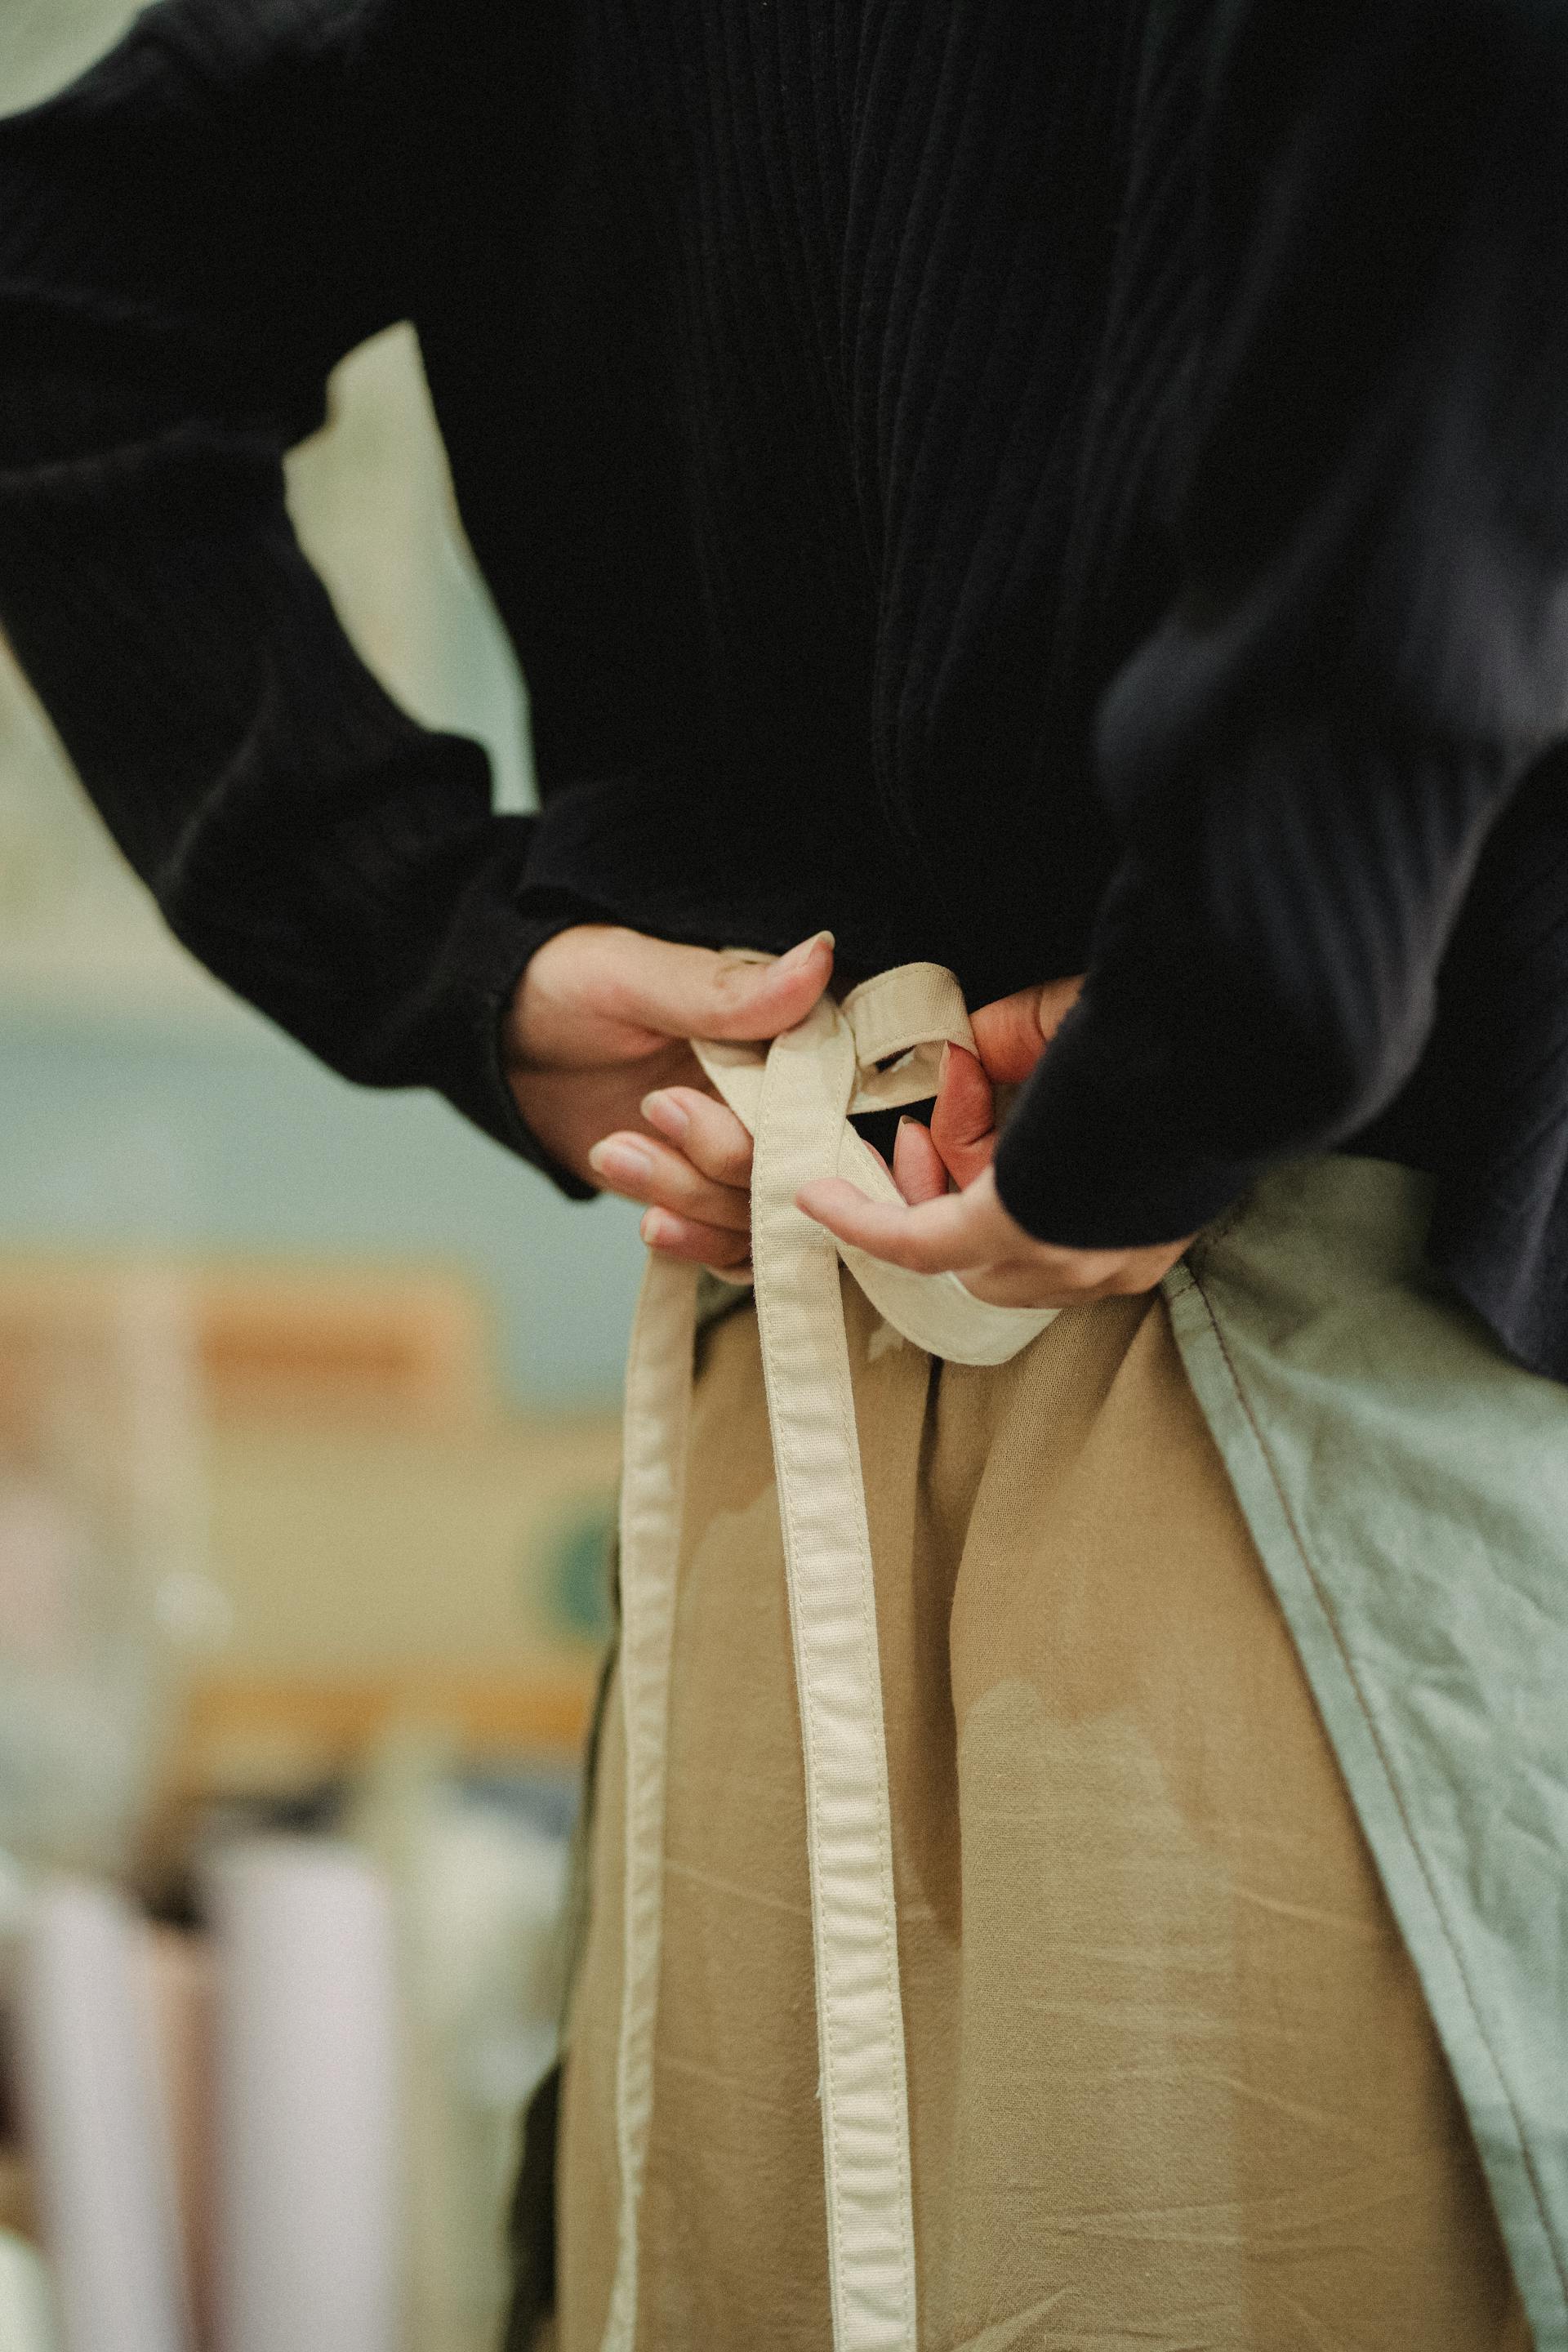 A person tying an apron | Source: Pexels